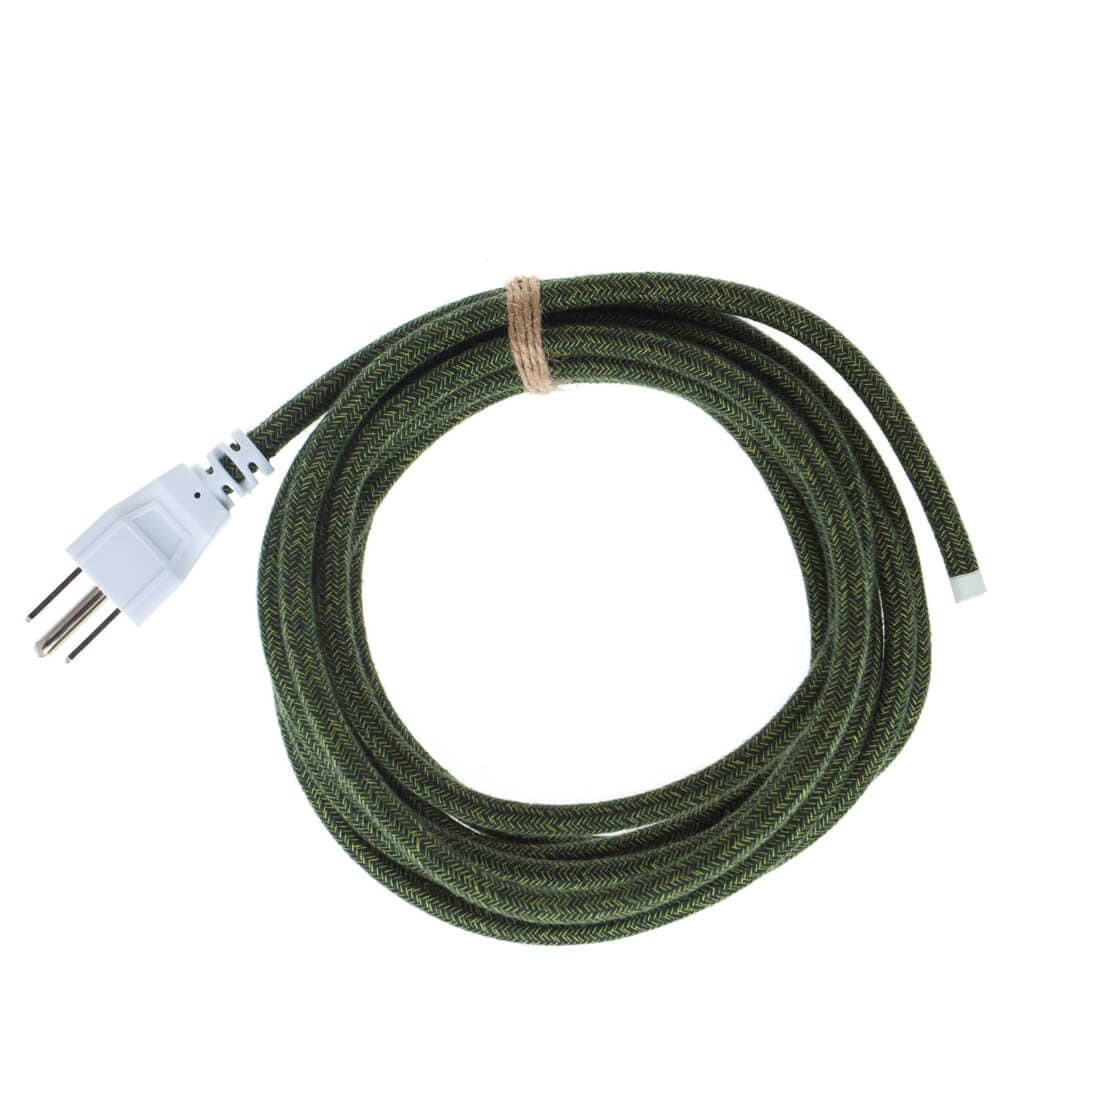 3 Prong Power Cord Whip - 15 Foot